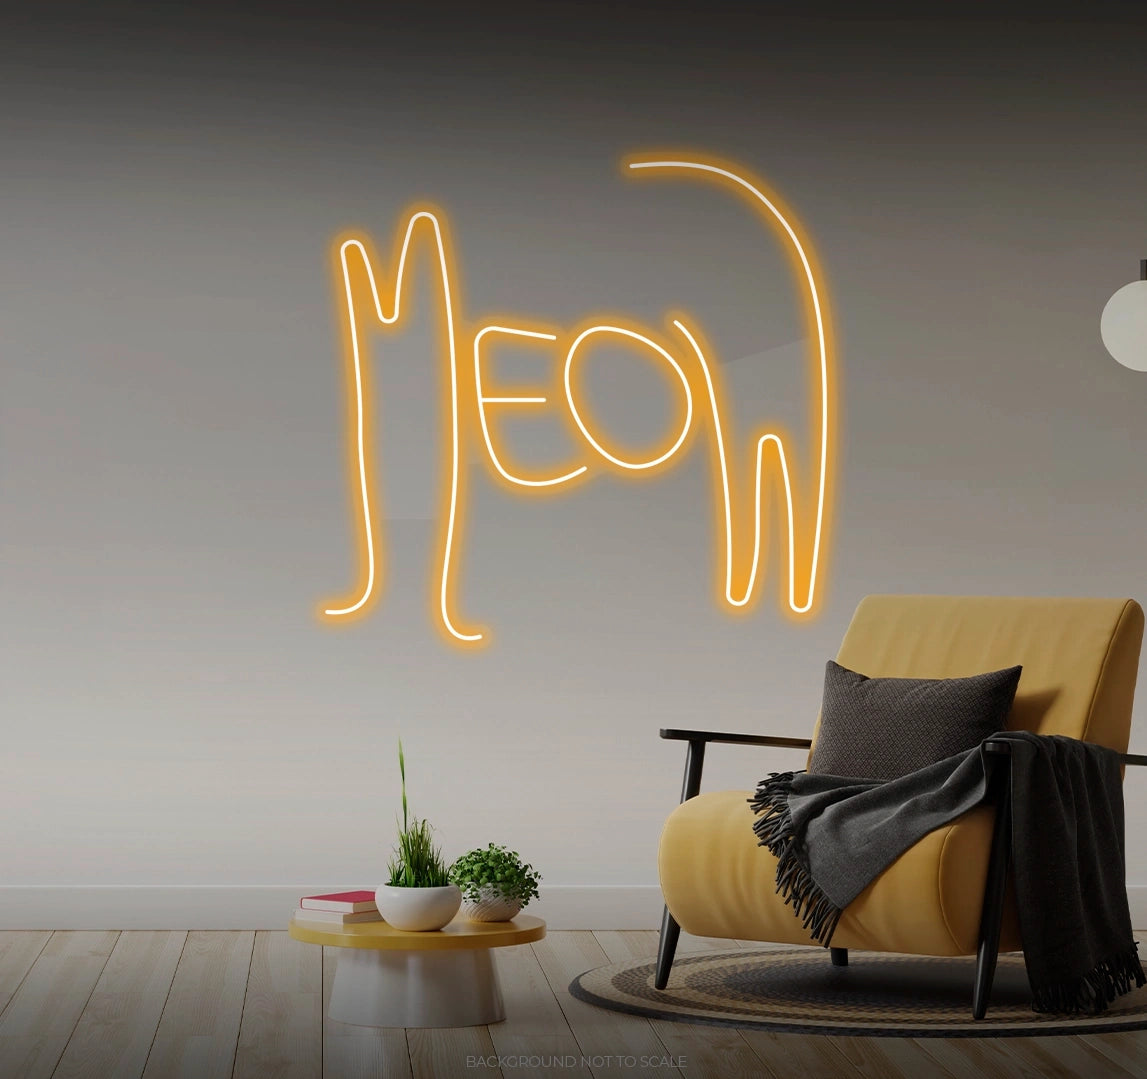 Meow cat silhouette LED neon